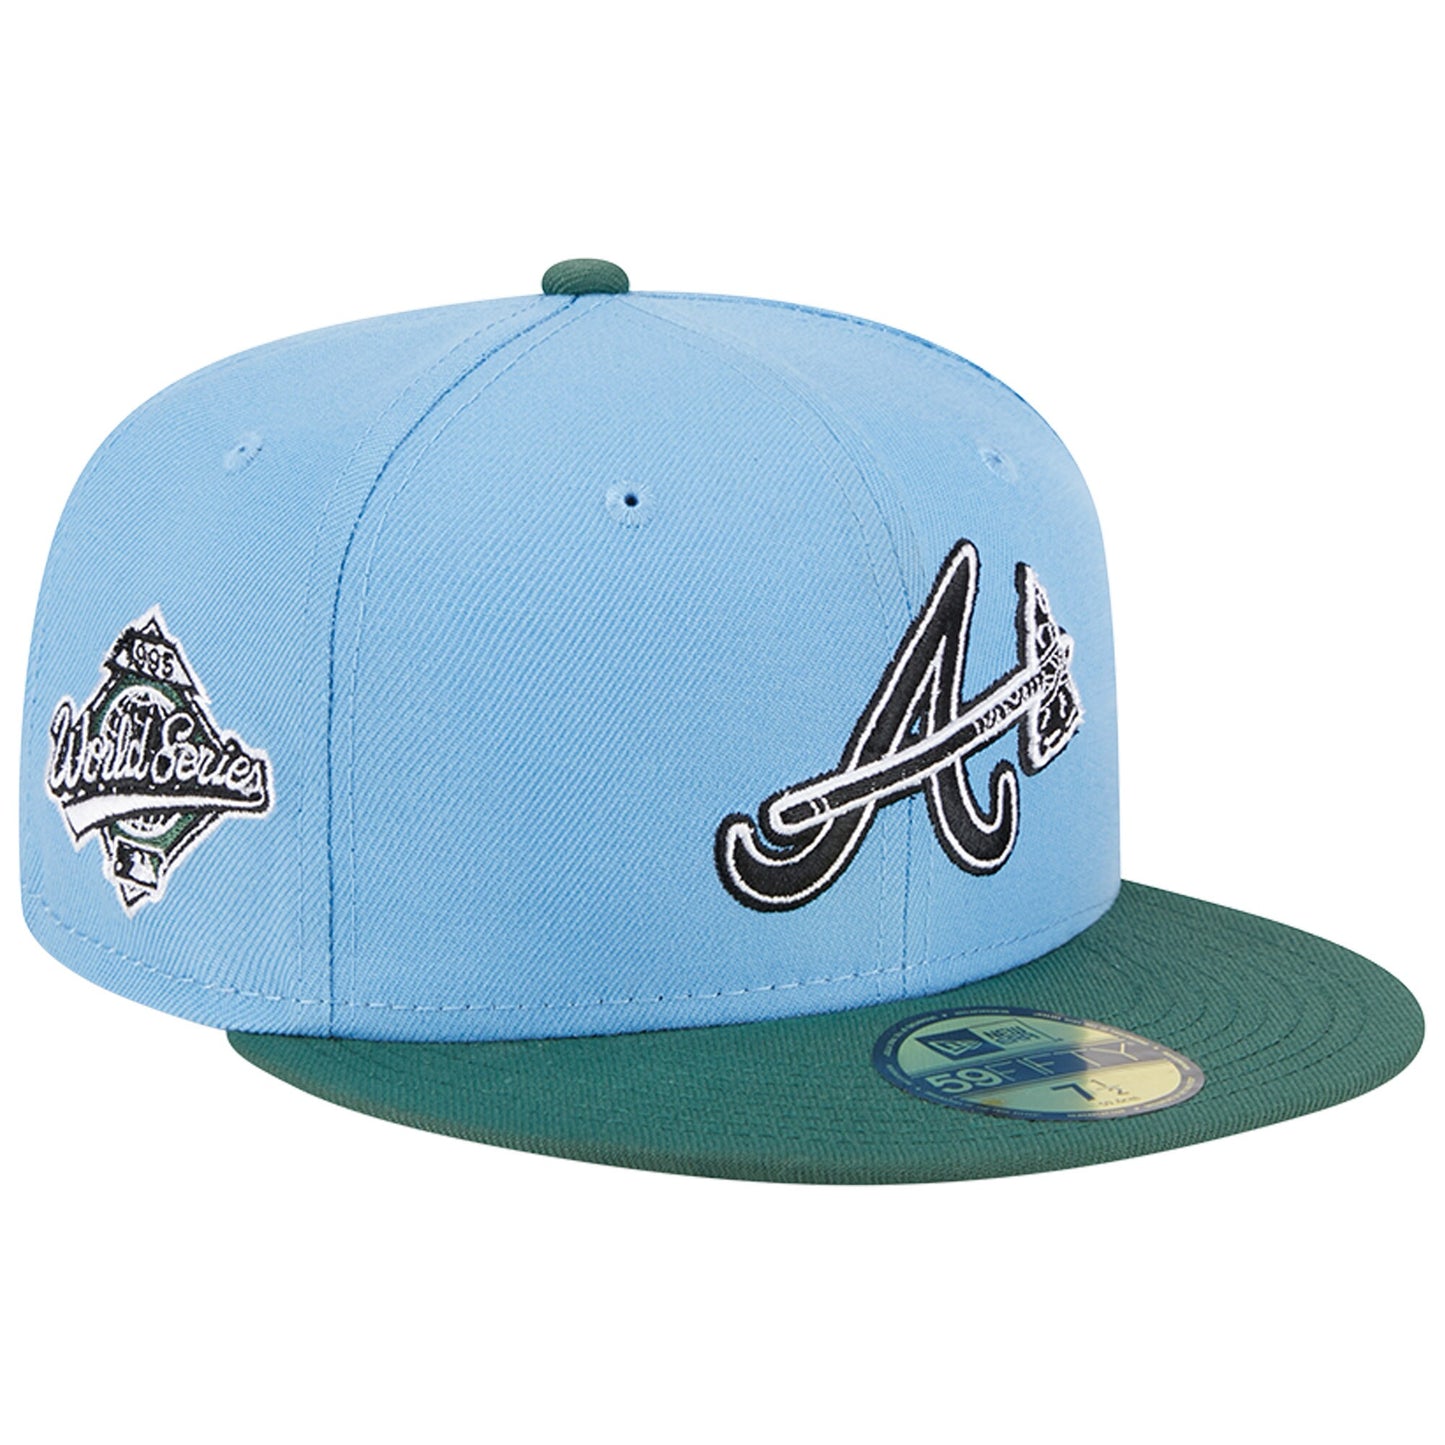 Atlanta Braves New Era 1995 World Series 59FIFTY Fitted Hat - Sky Blue/Cilantro